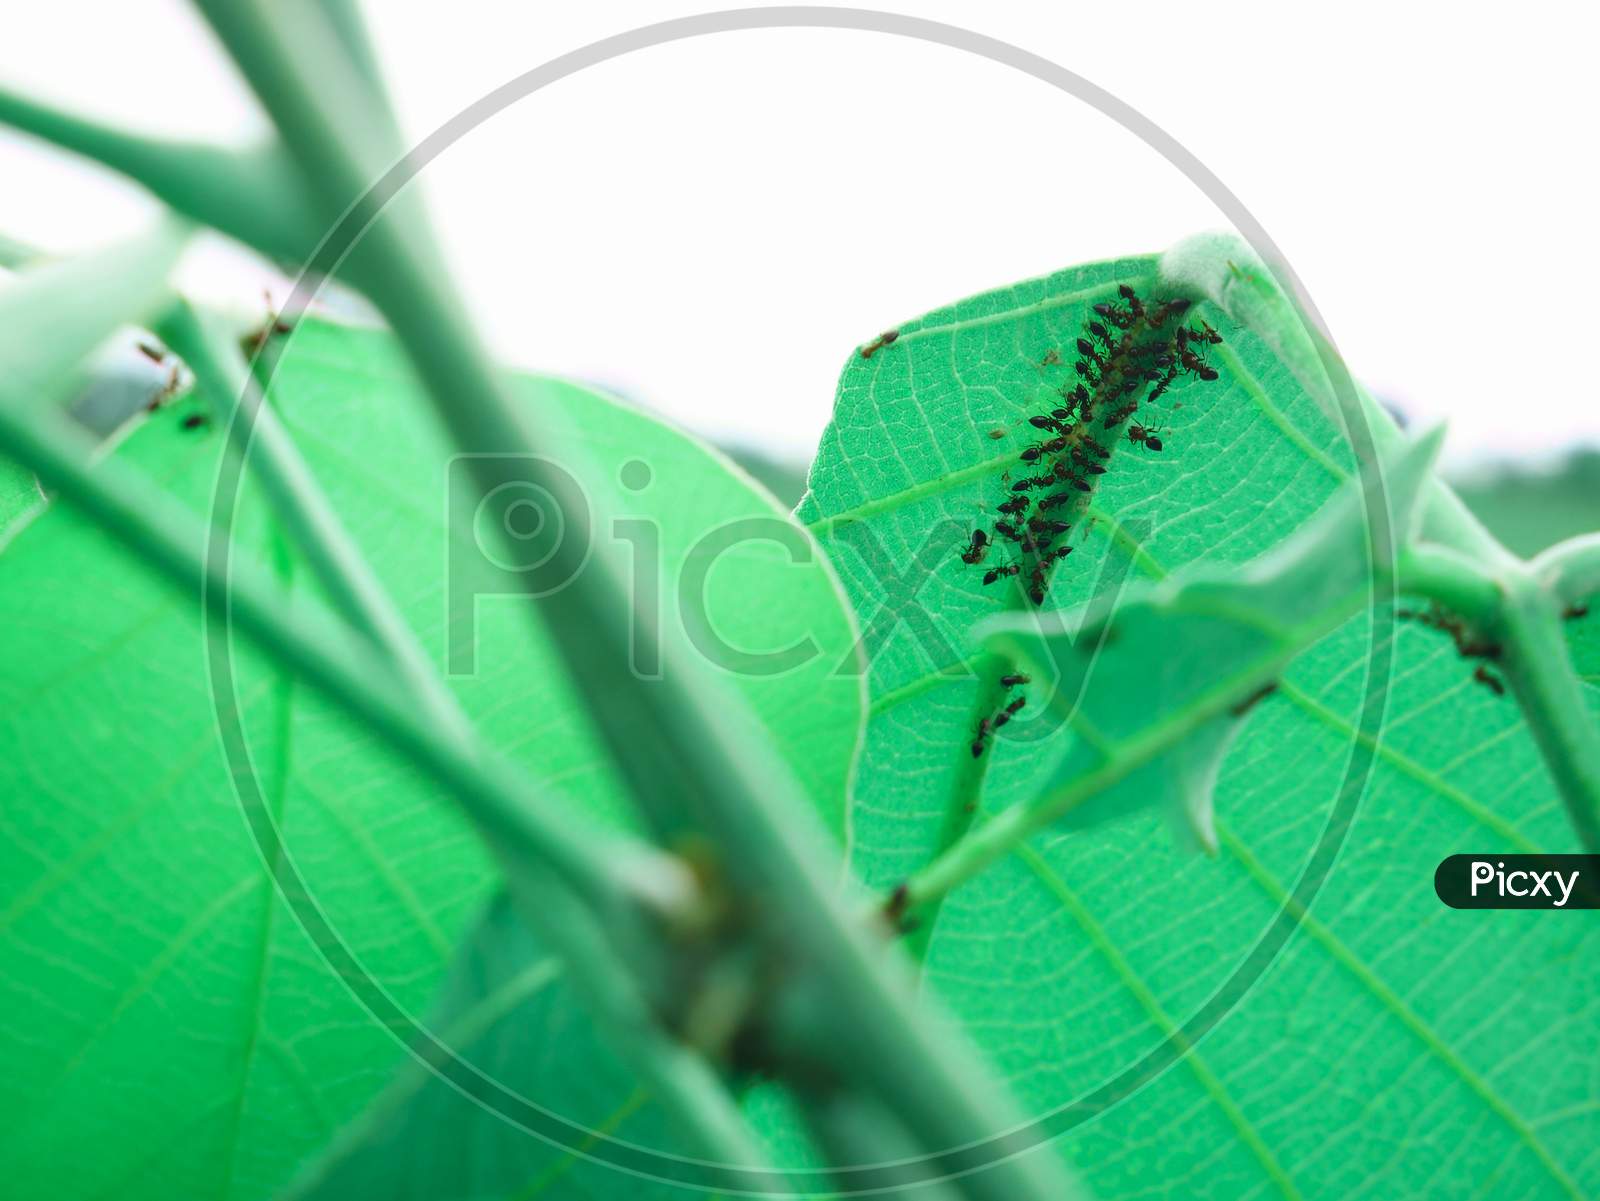 Group Of Ant Image On Leaf Top Corner Frame Shot, Nature Background With Text Space, Indian Insect Presentation.